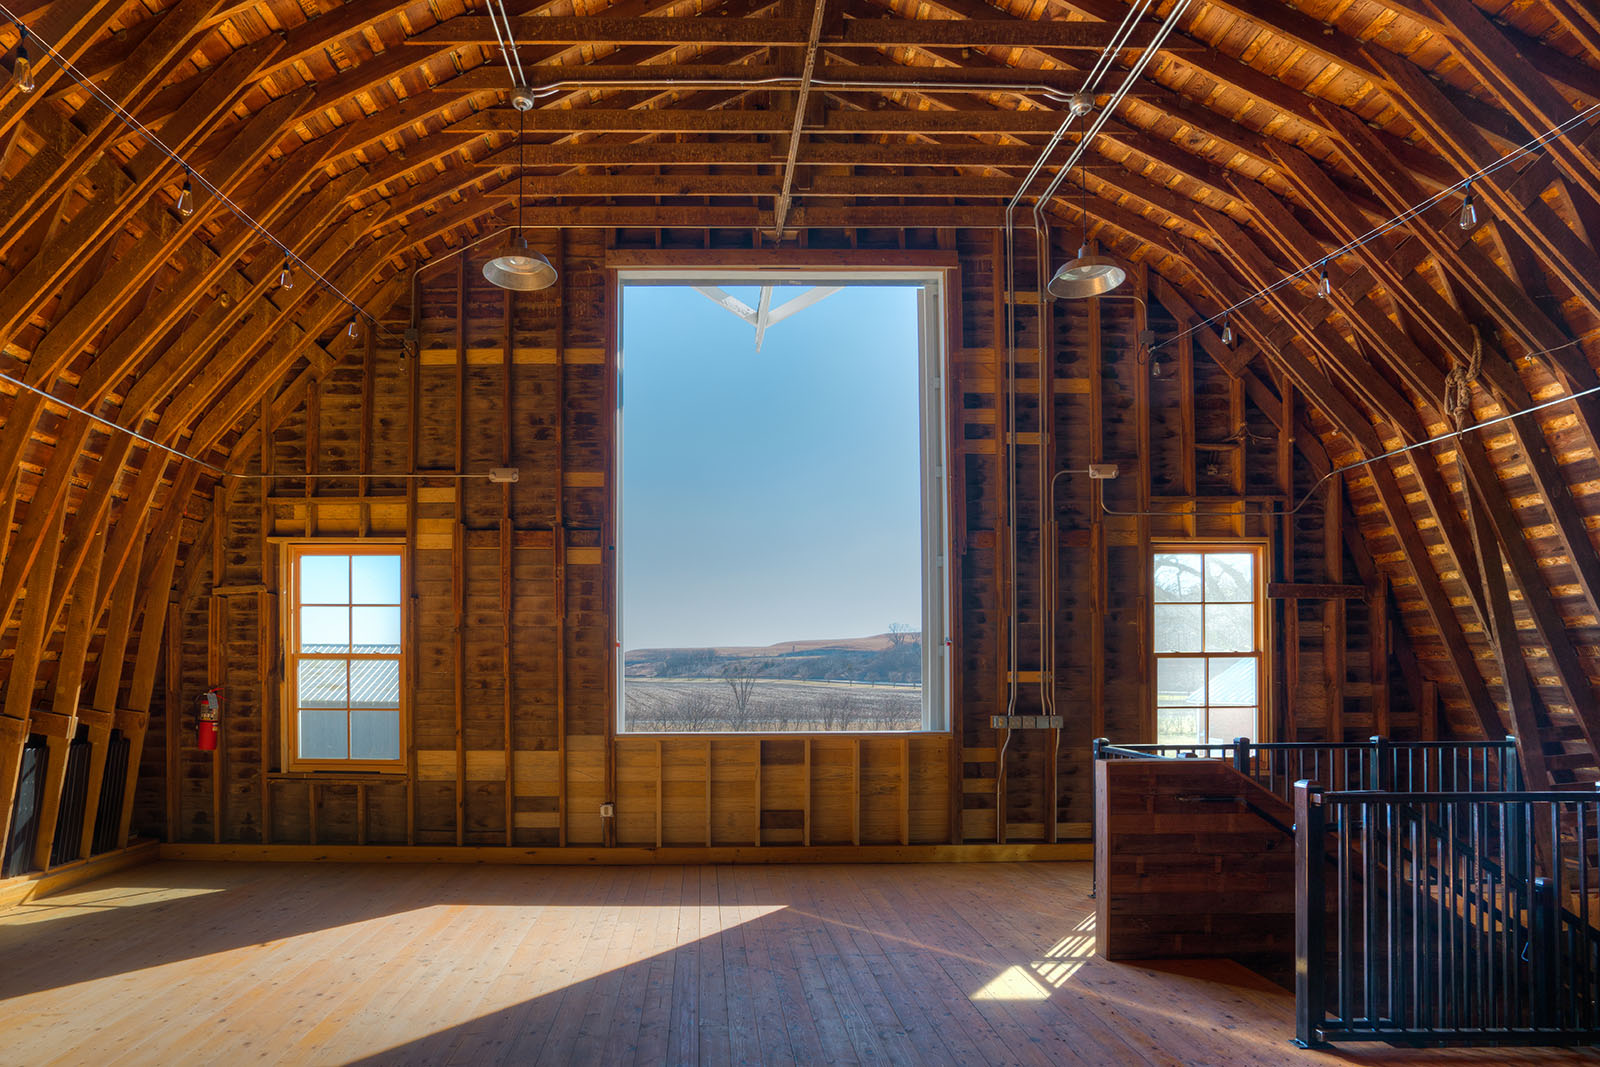 Loft view from the white barn showing southern sky